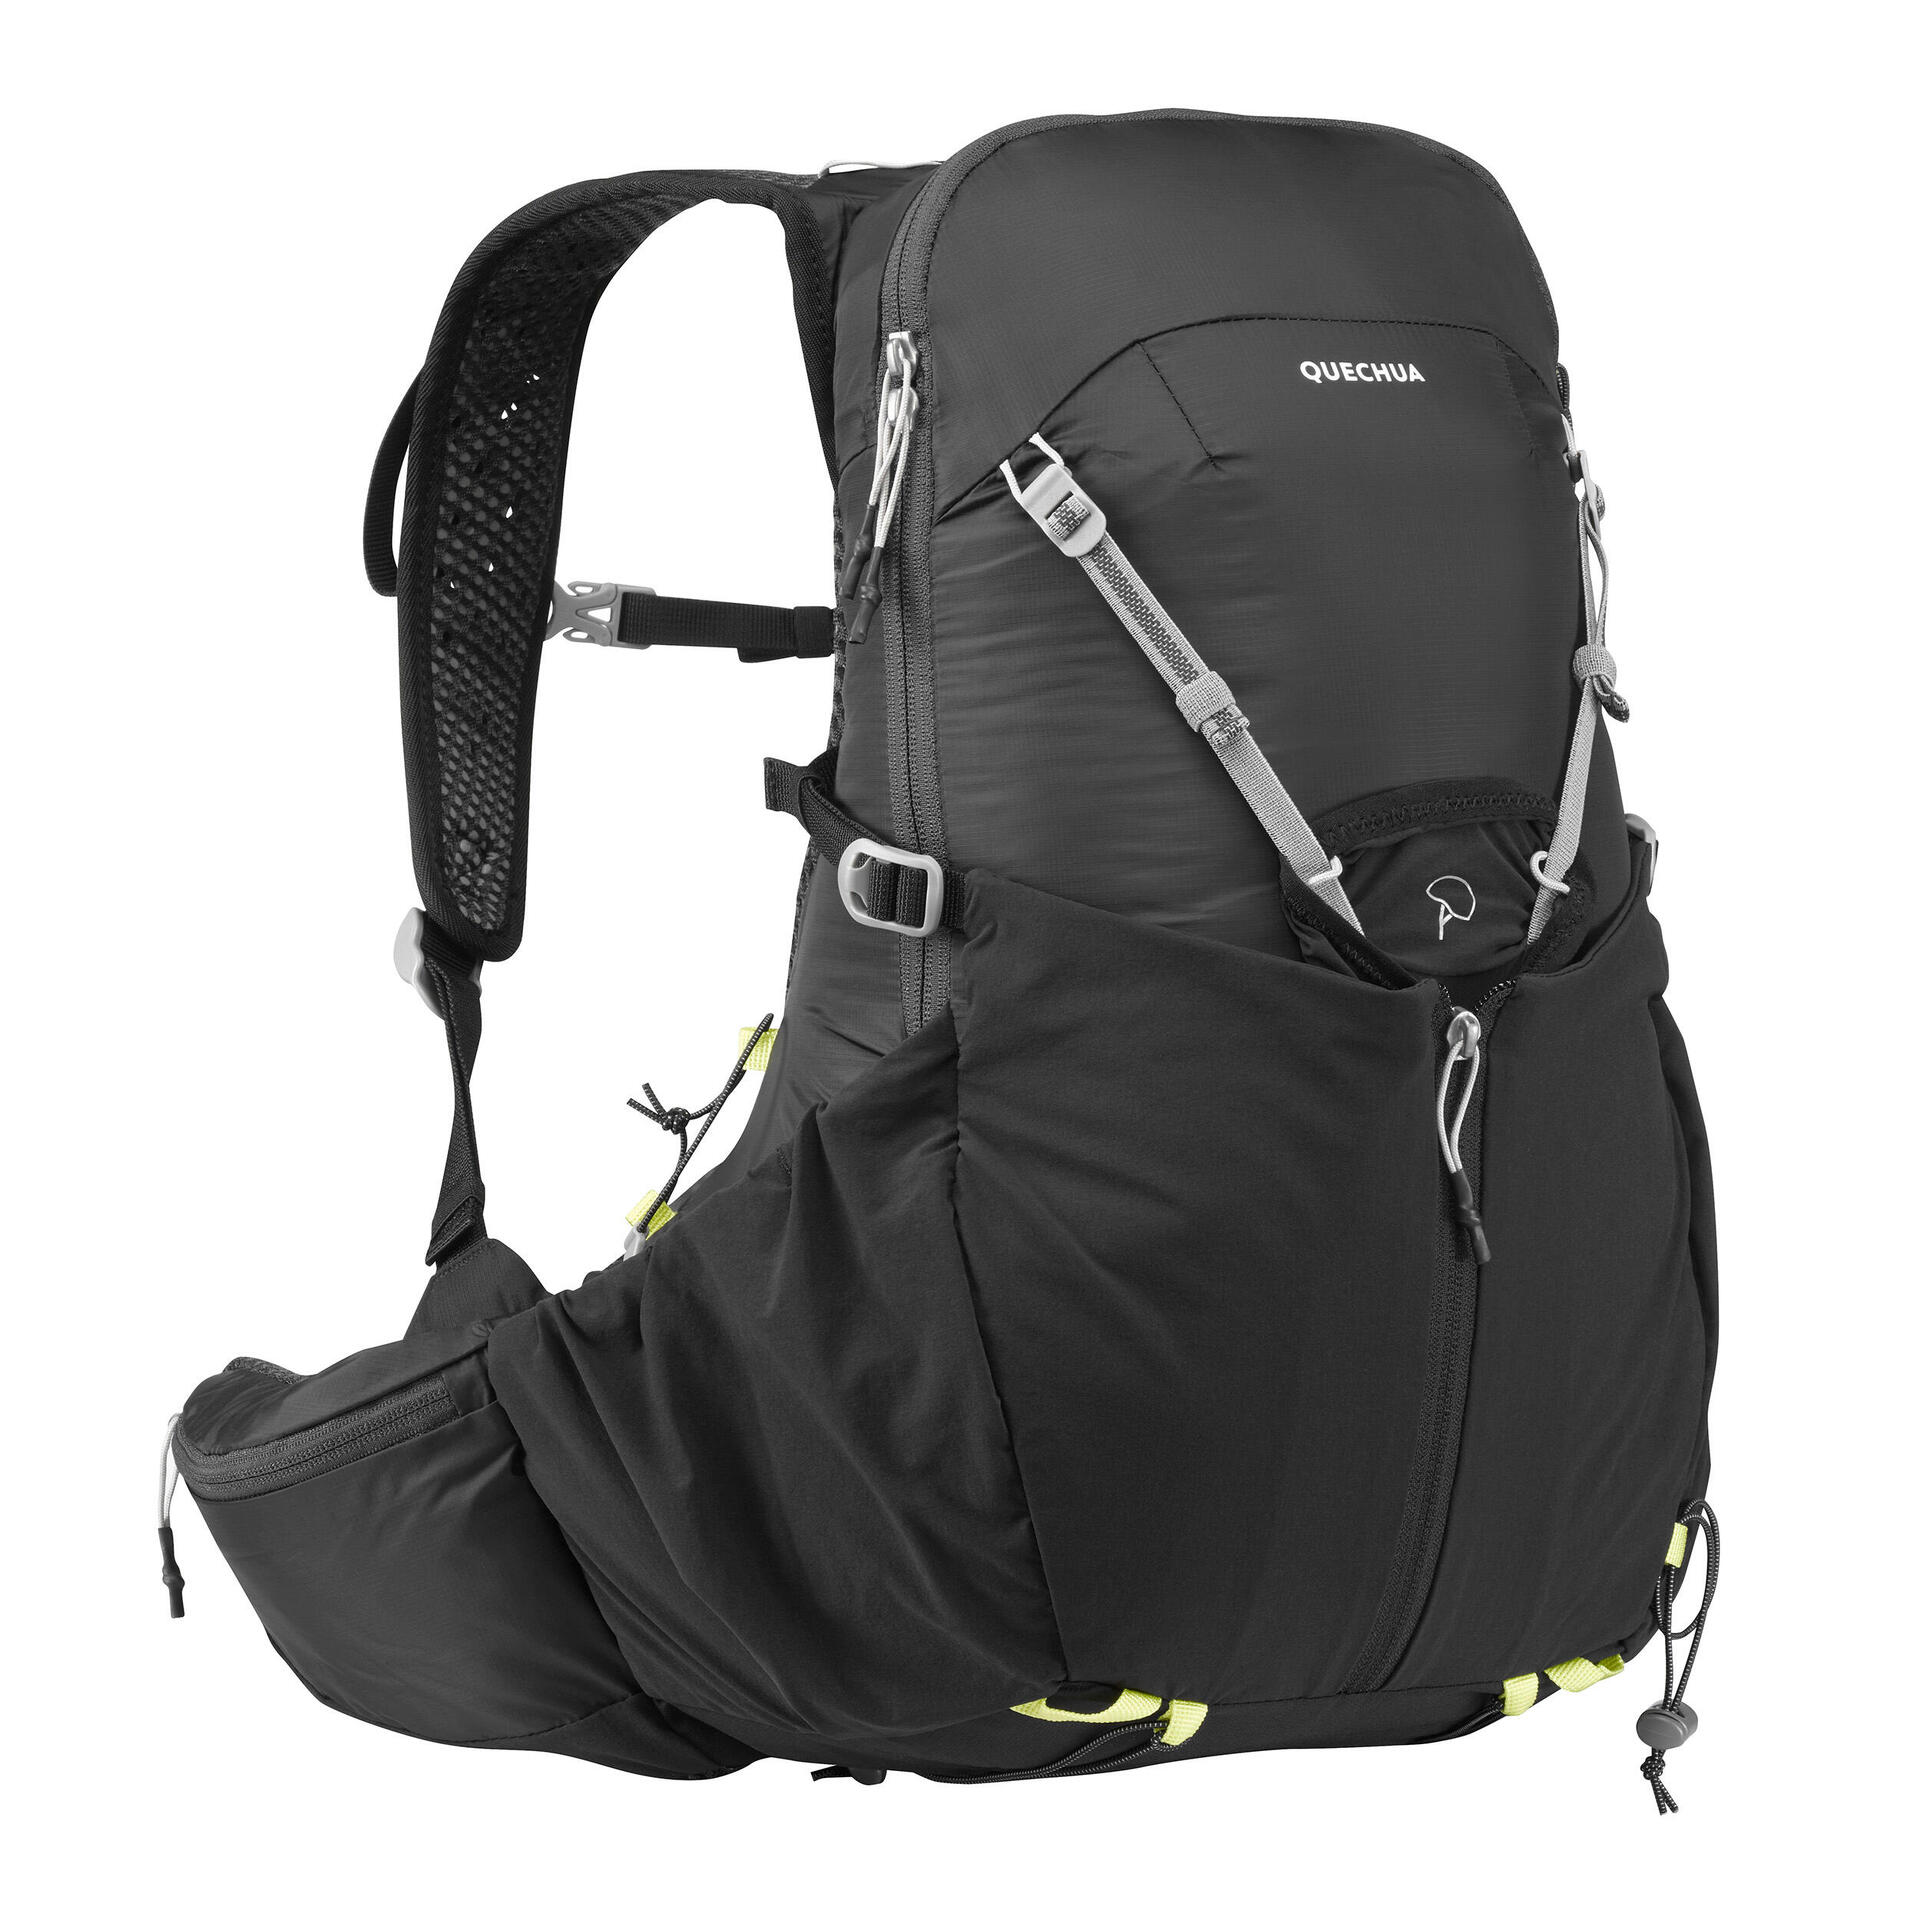 How to choose your hiking backpack?